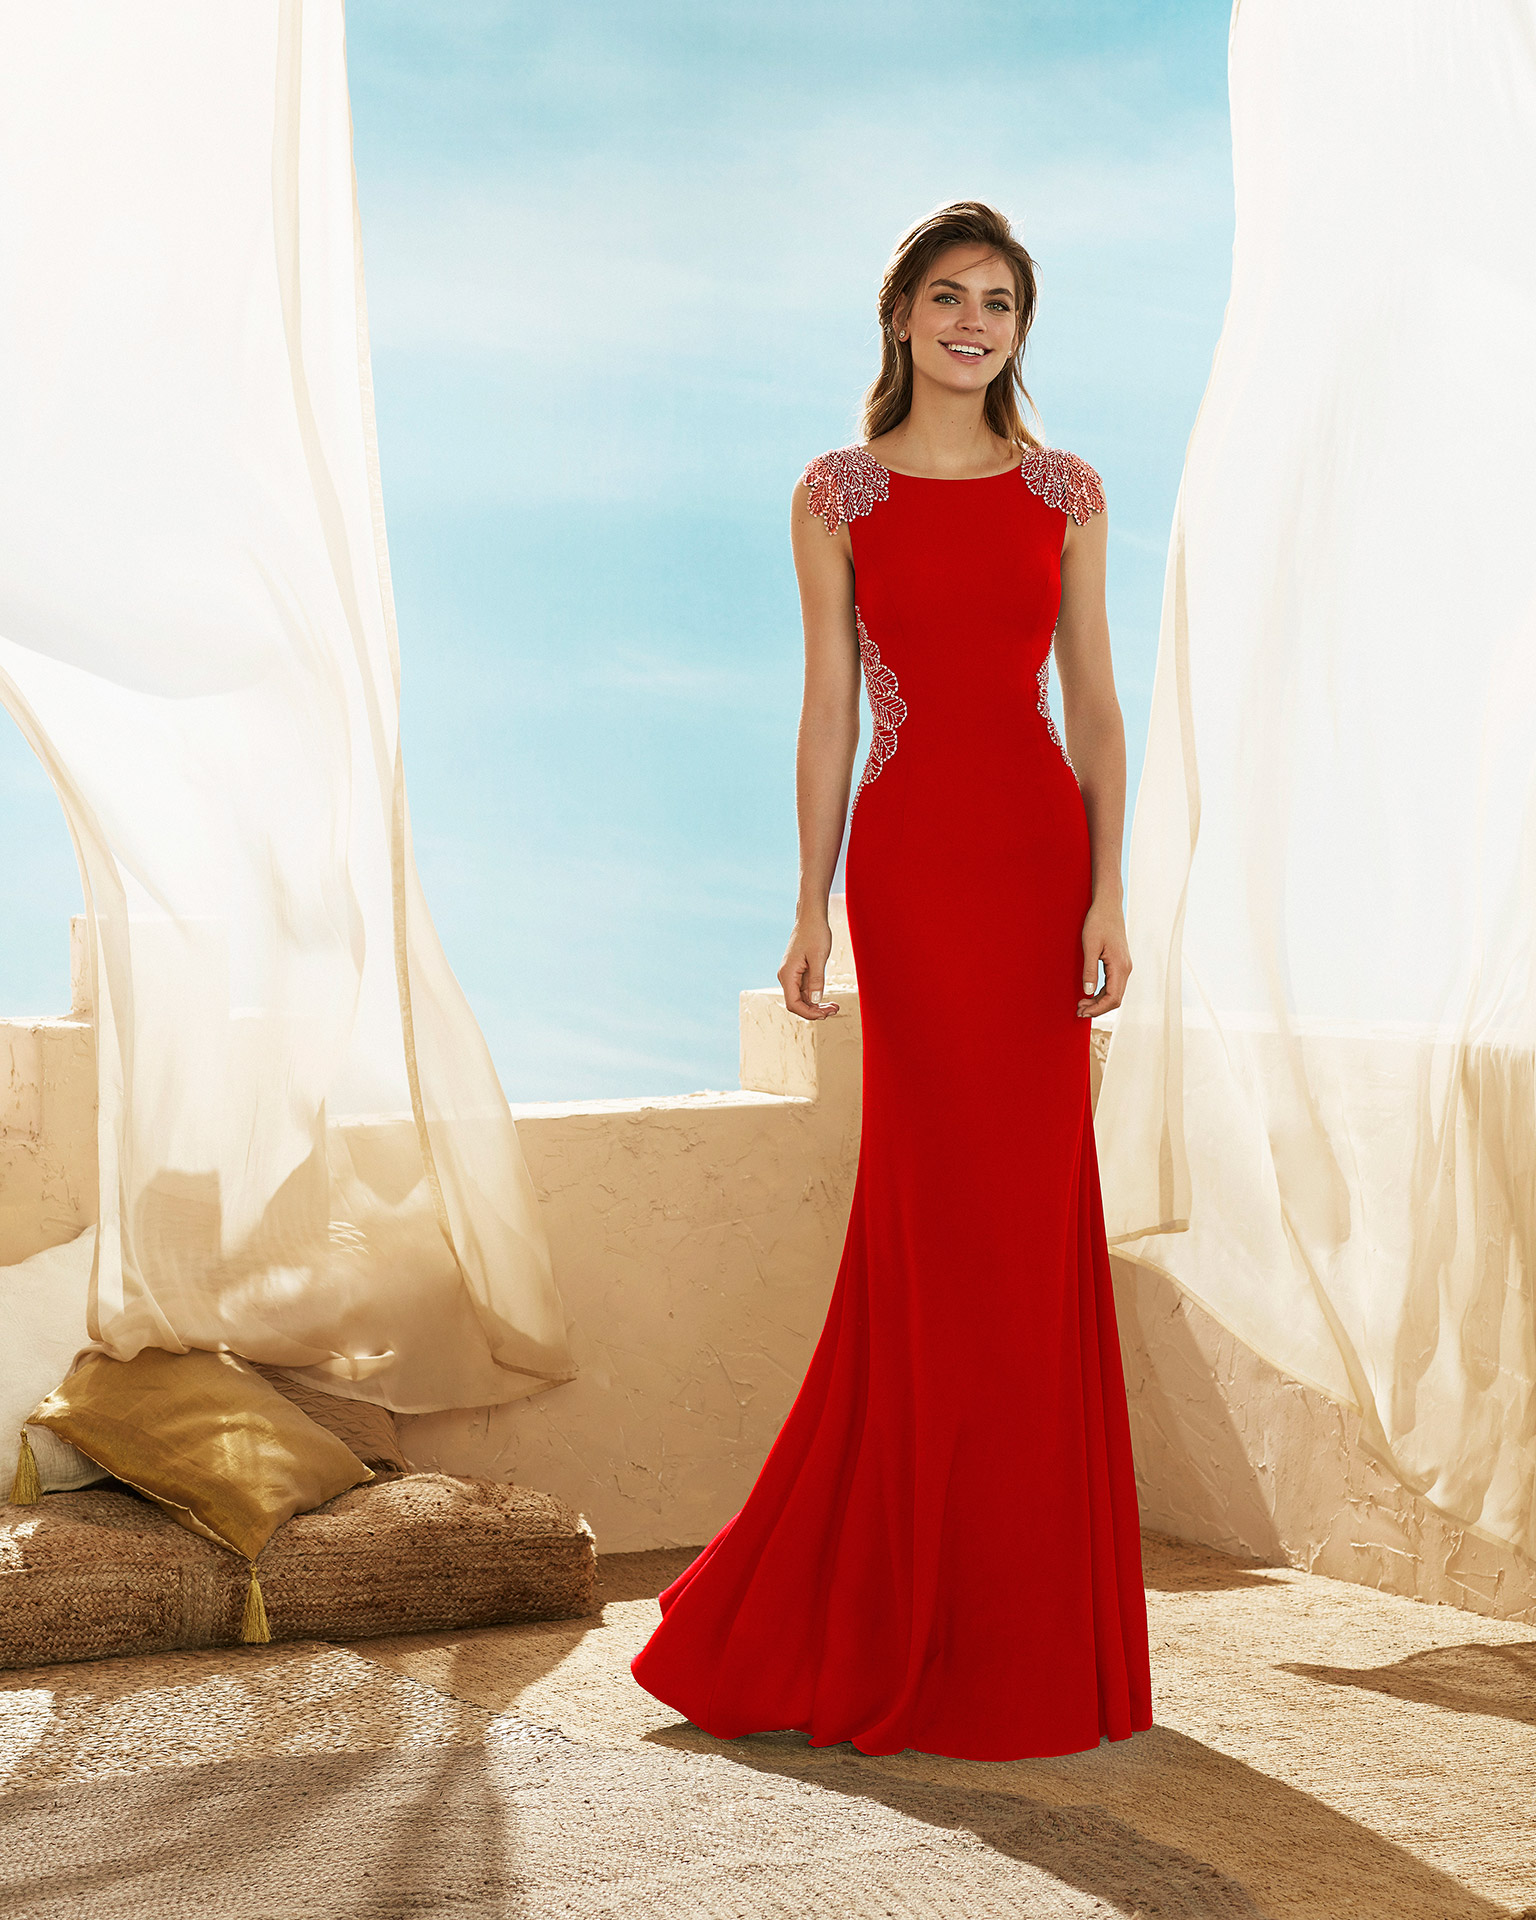 Beaded crepe cocktail dress. With bateau neckline and teardrop back. 2020 MARFIL BARCELONA Collection.